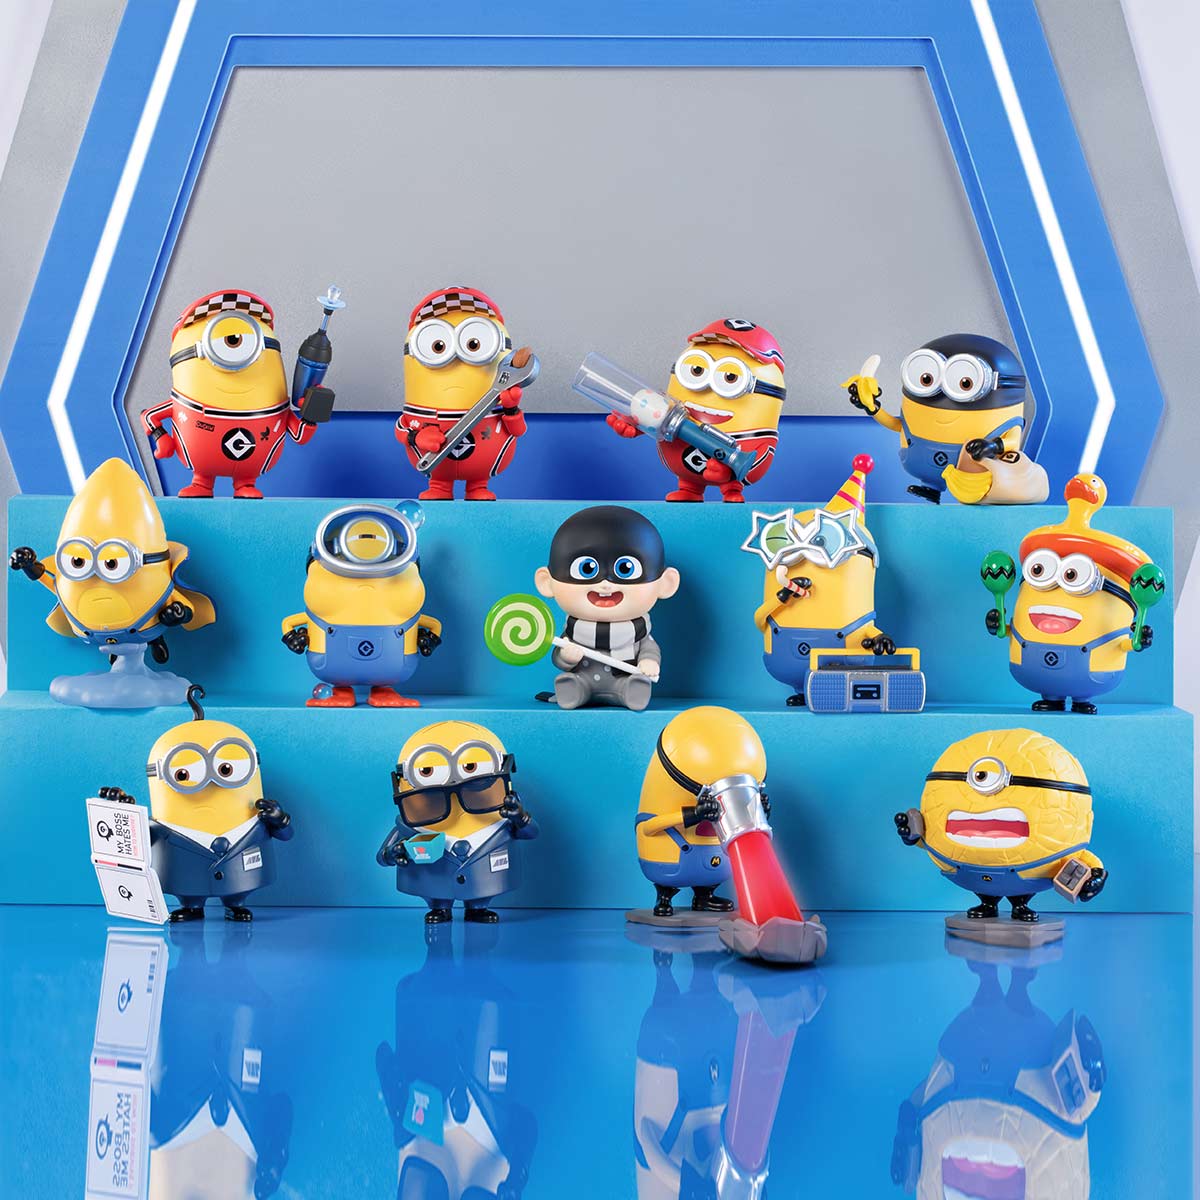 Alt text: Universal Despicable Me 4 Blind Box Series featuring various yellow toy figurines, including characters with accessories and unique designs. Preorder for July 2024.